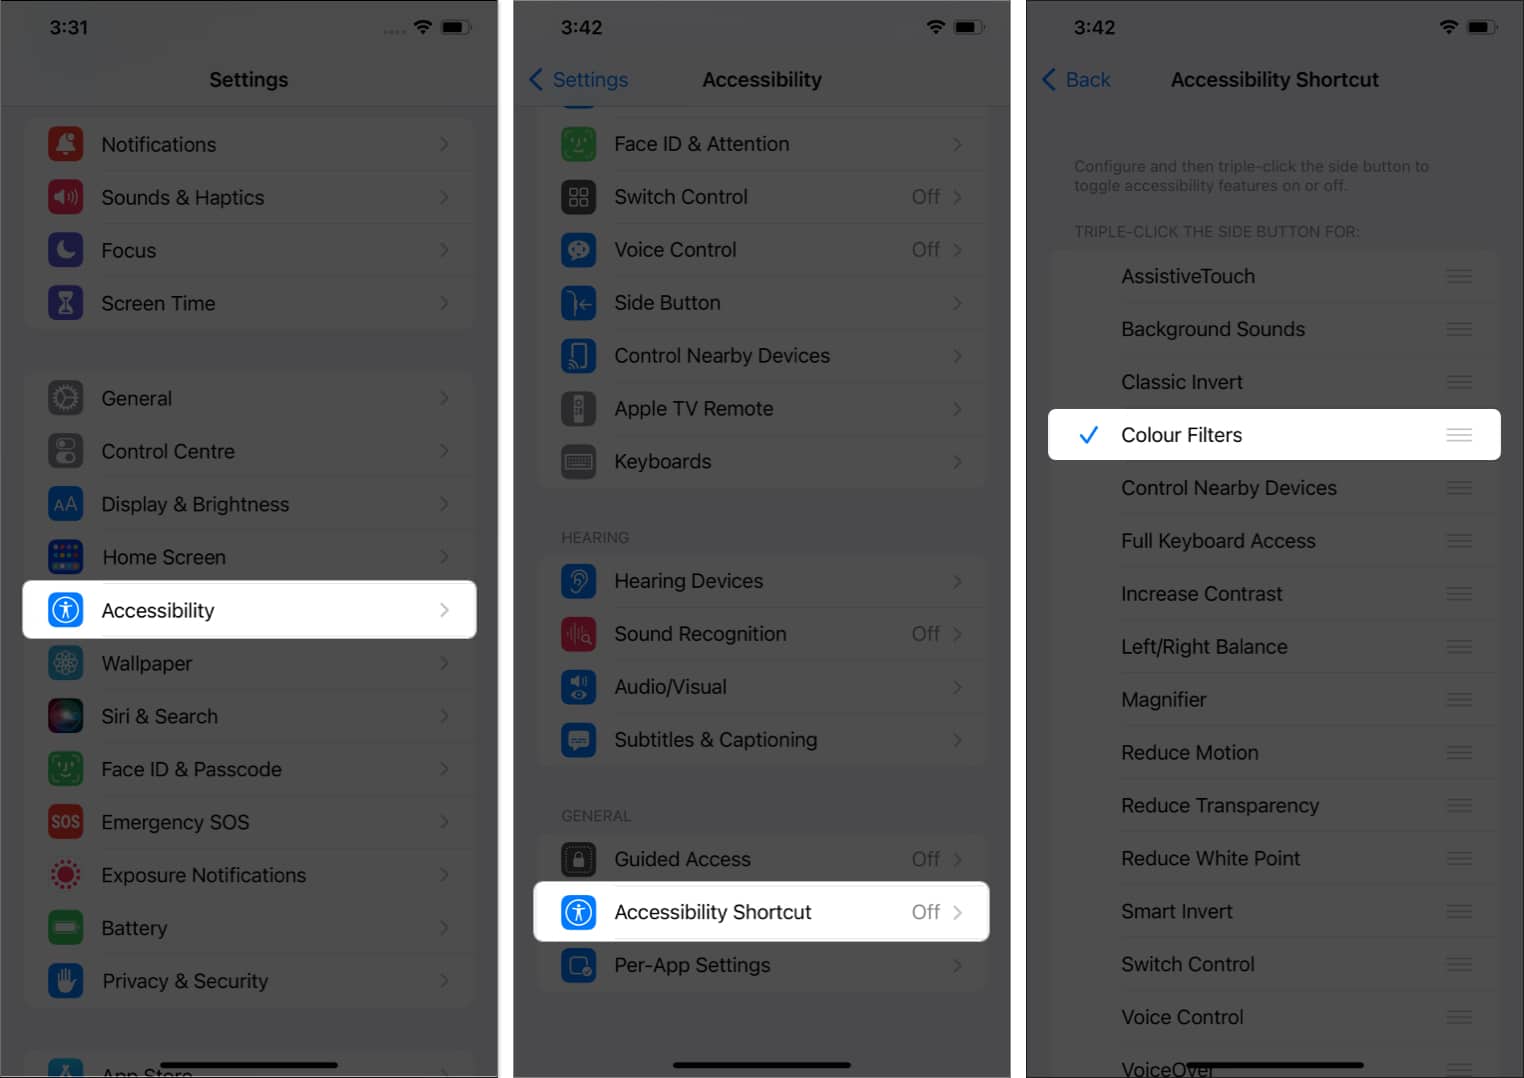 tap accessibility, tap accessibility shortcut, select color filters in settings